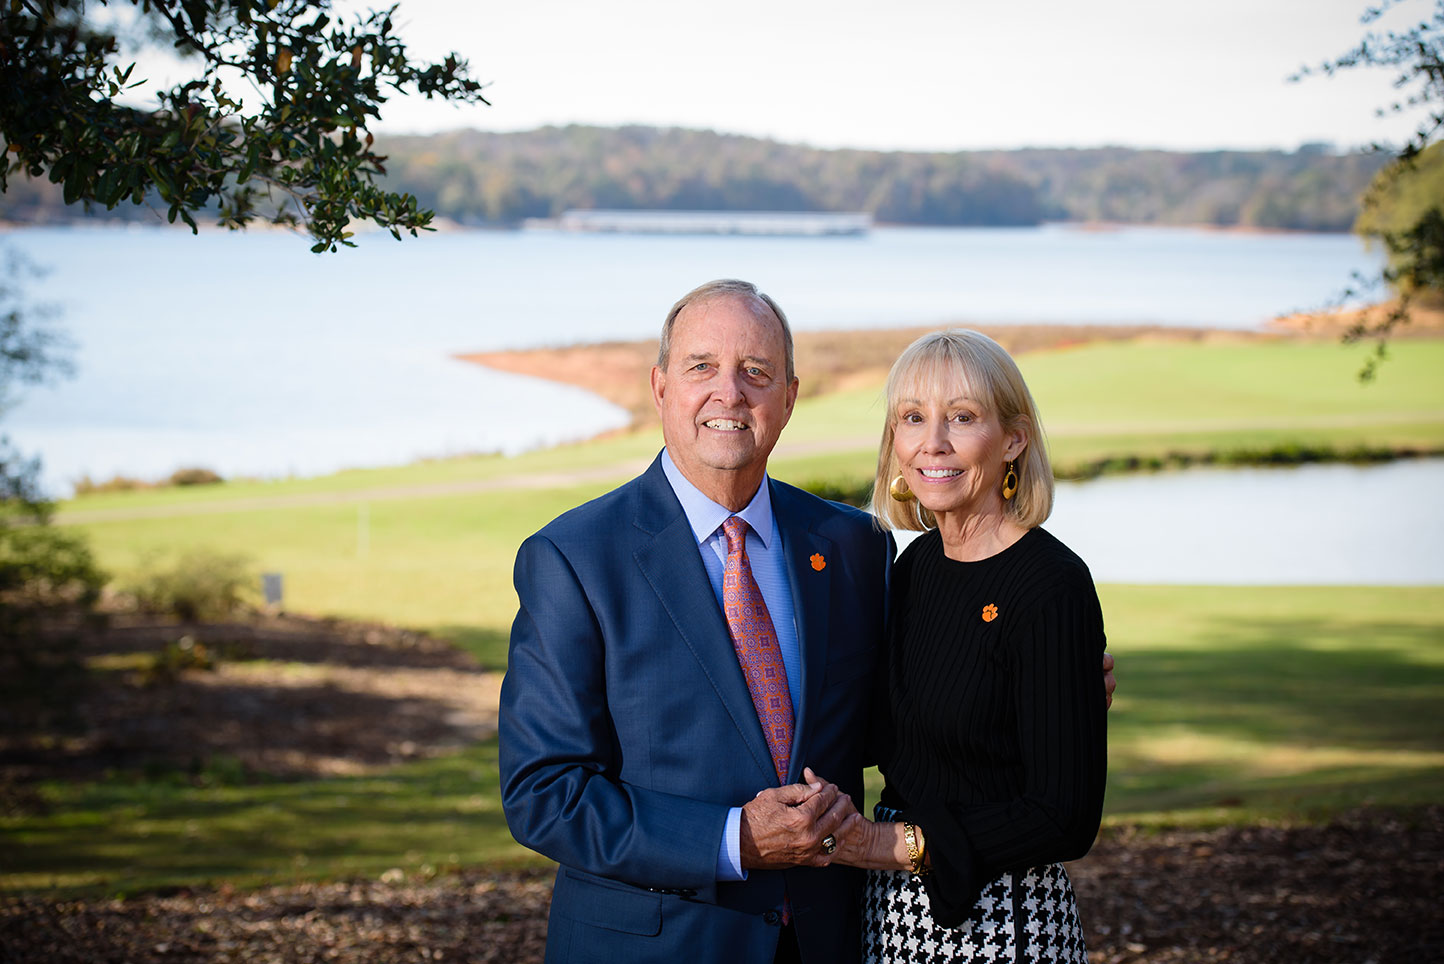 Older man and his wife holding hands and standing together with grass and lake in the background.